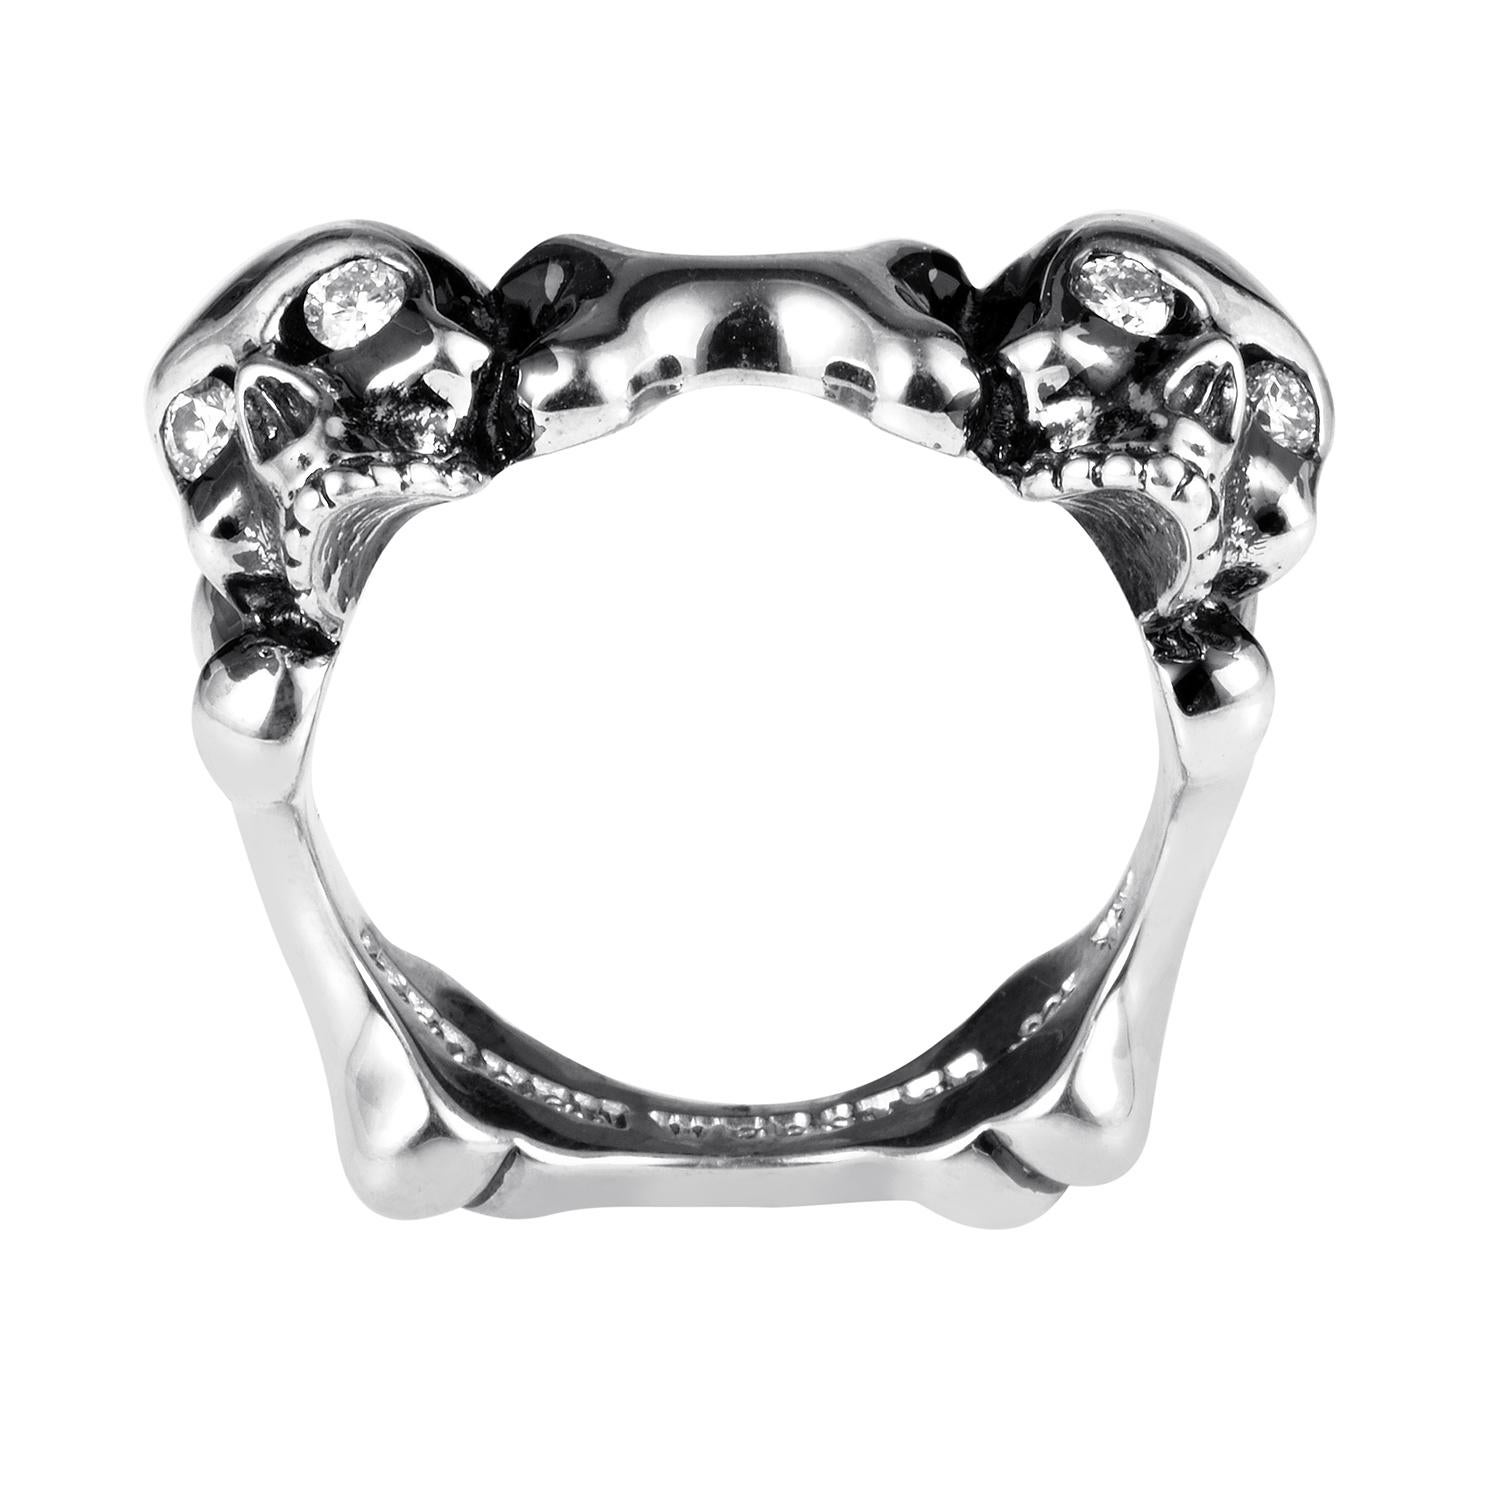 Stephen Webster Jewelry is for the outstanding, and this double skull ring in sterling silver is just that. Black rhodium provides the dark lines and notes needed for somber tones while ~.16ct of diamonds provide piercing eyes.<br/>Ring Top